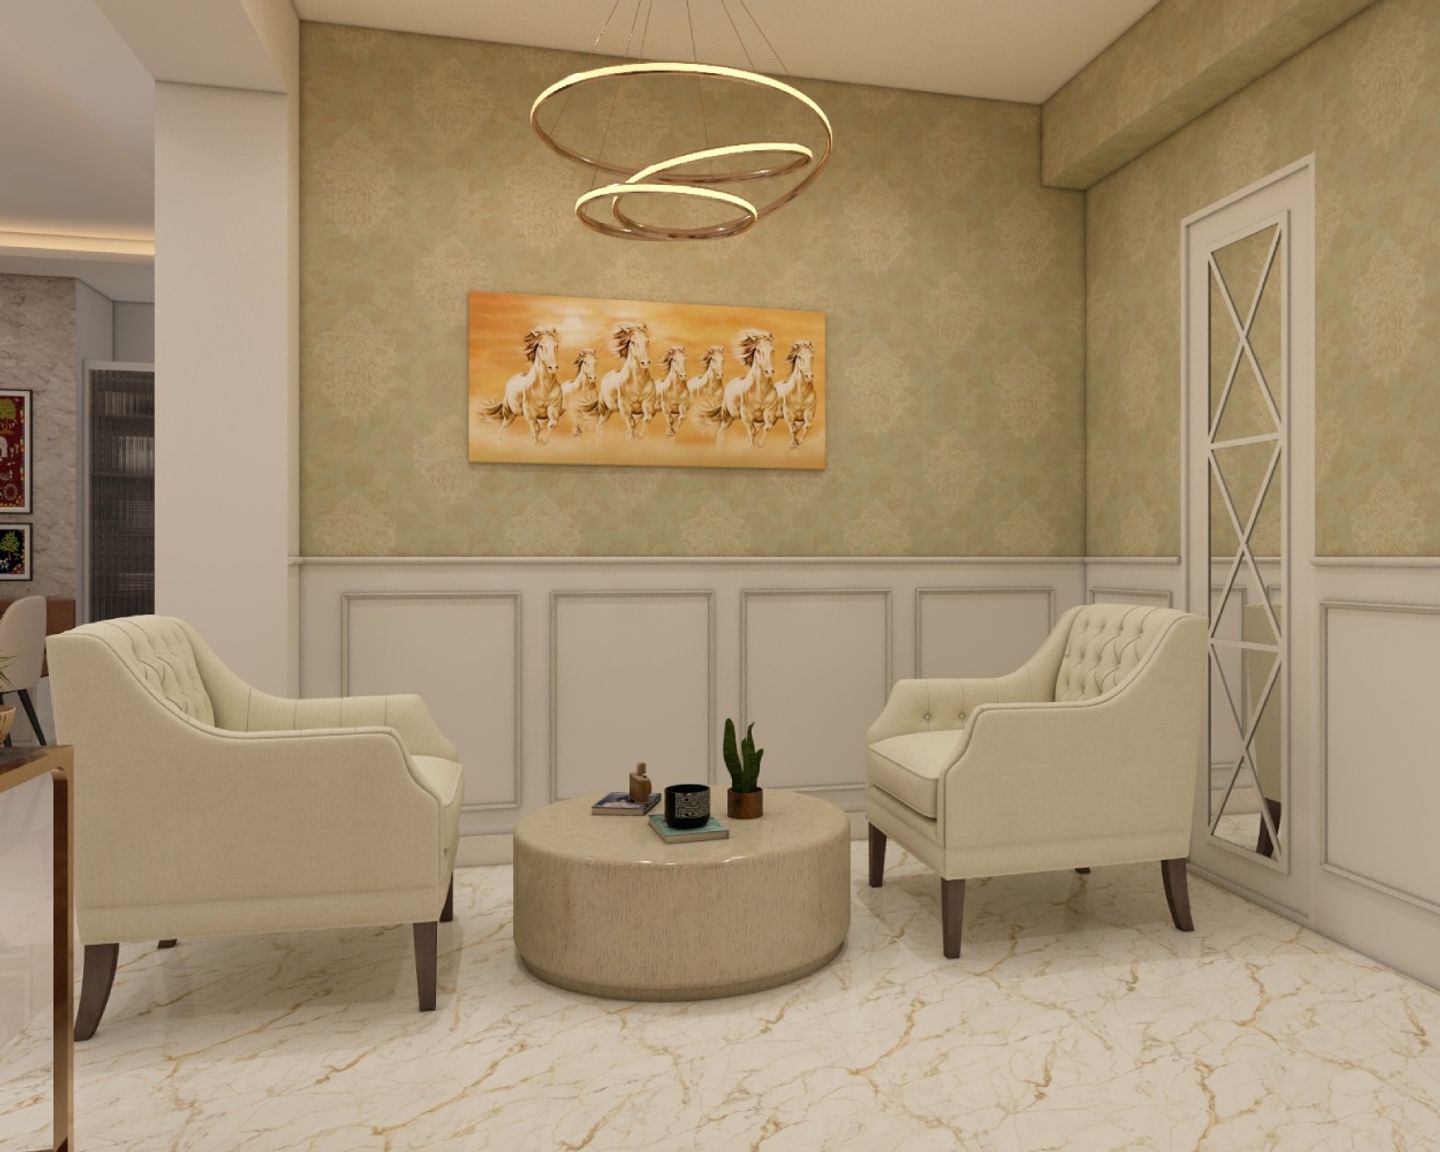 11x10 Ft Foyer Design With Off-White Accent Chairs - Livspace